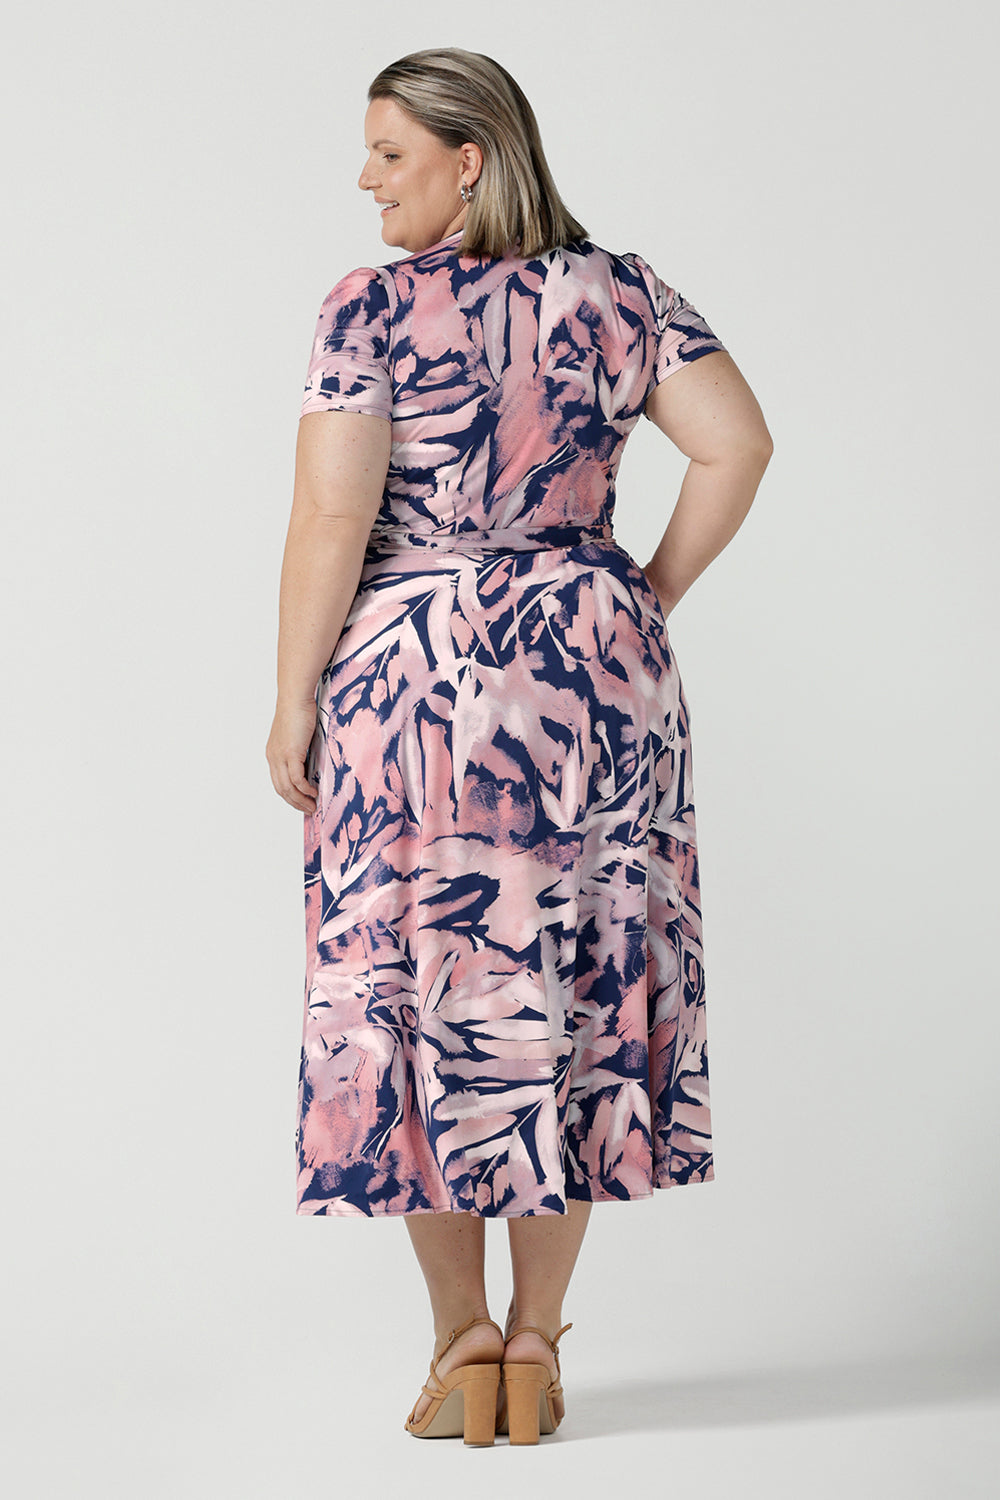 Back view of a size 18 Curvy woman wears the Alexis dress in the Cantata print. A functioning wrap dress with tie side and short sleeve and midi length. Navy base with an abstract brush strokes leafy print. Made in Australia for women size inclusive 8 - 24.